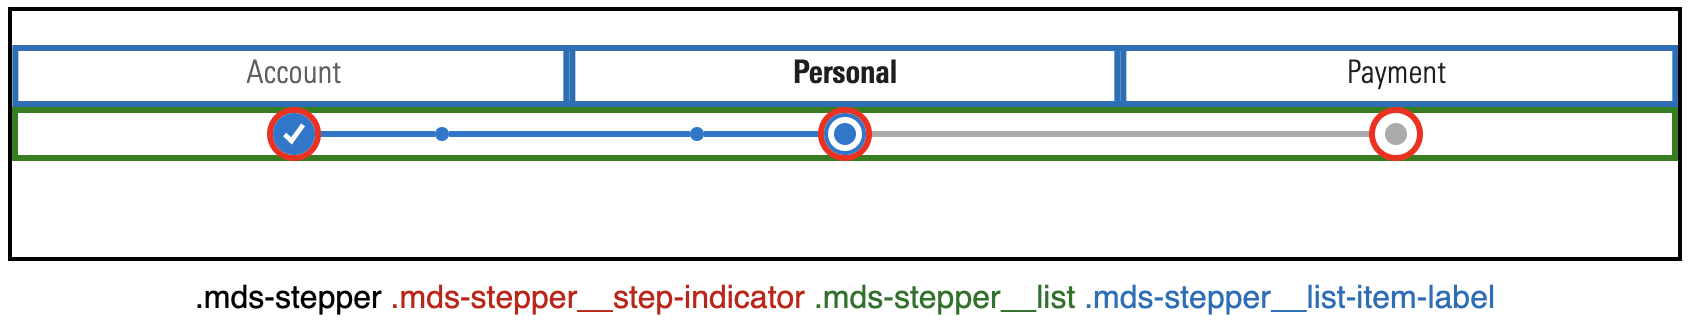 Image showing the stepper elements that will be overridden and their relevant classes.